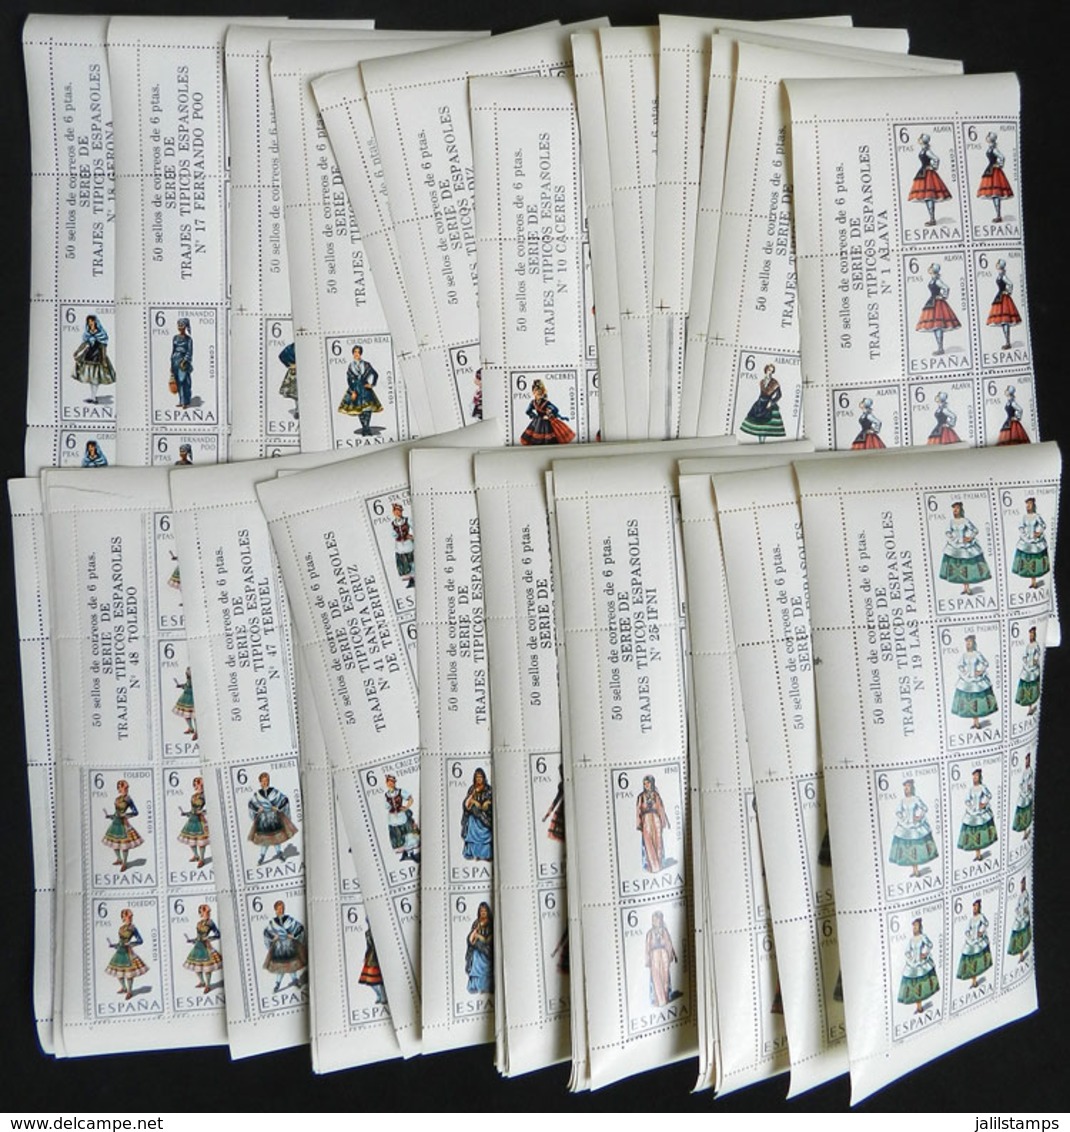 SPAIN: Year 1970 And Following, TYPICAL COSTUMES, Complete Set Of 53 Values In Corner Blocks Of 10 Stamps + 2 Labels, Ve - Nuevos